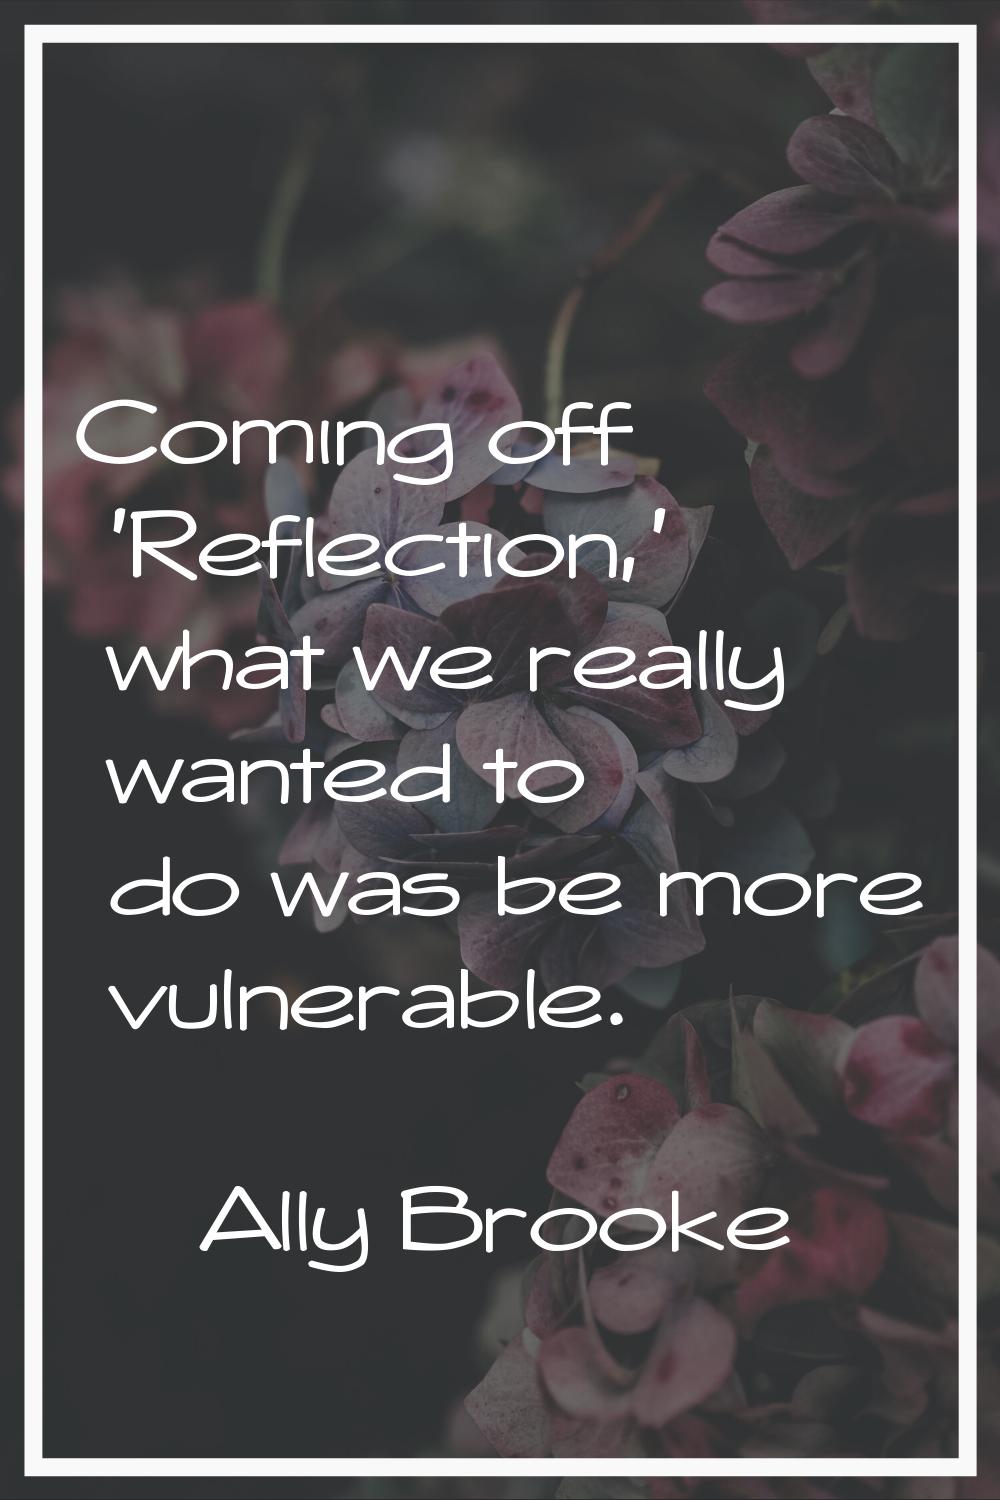 Coming off 'Reflection,' what we really wanted to do was be more vulnerable.